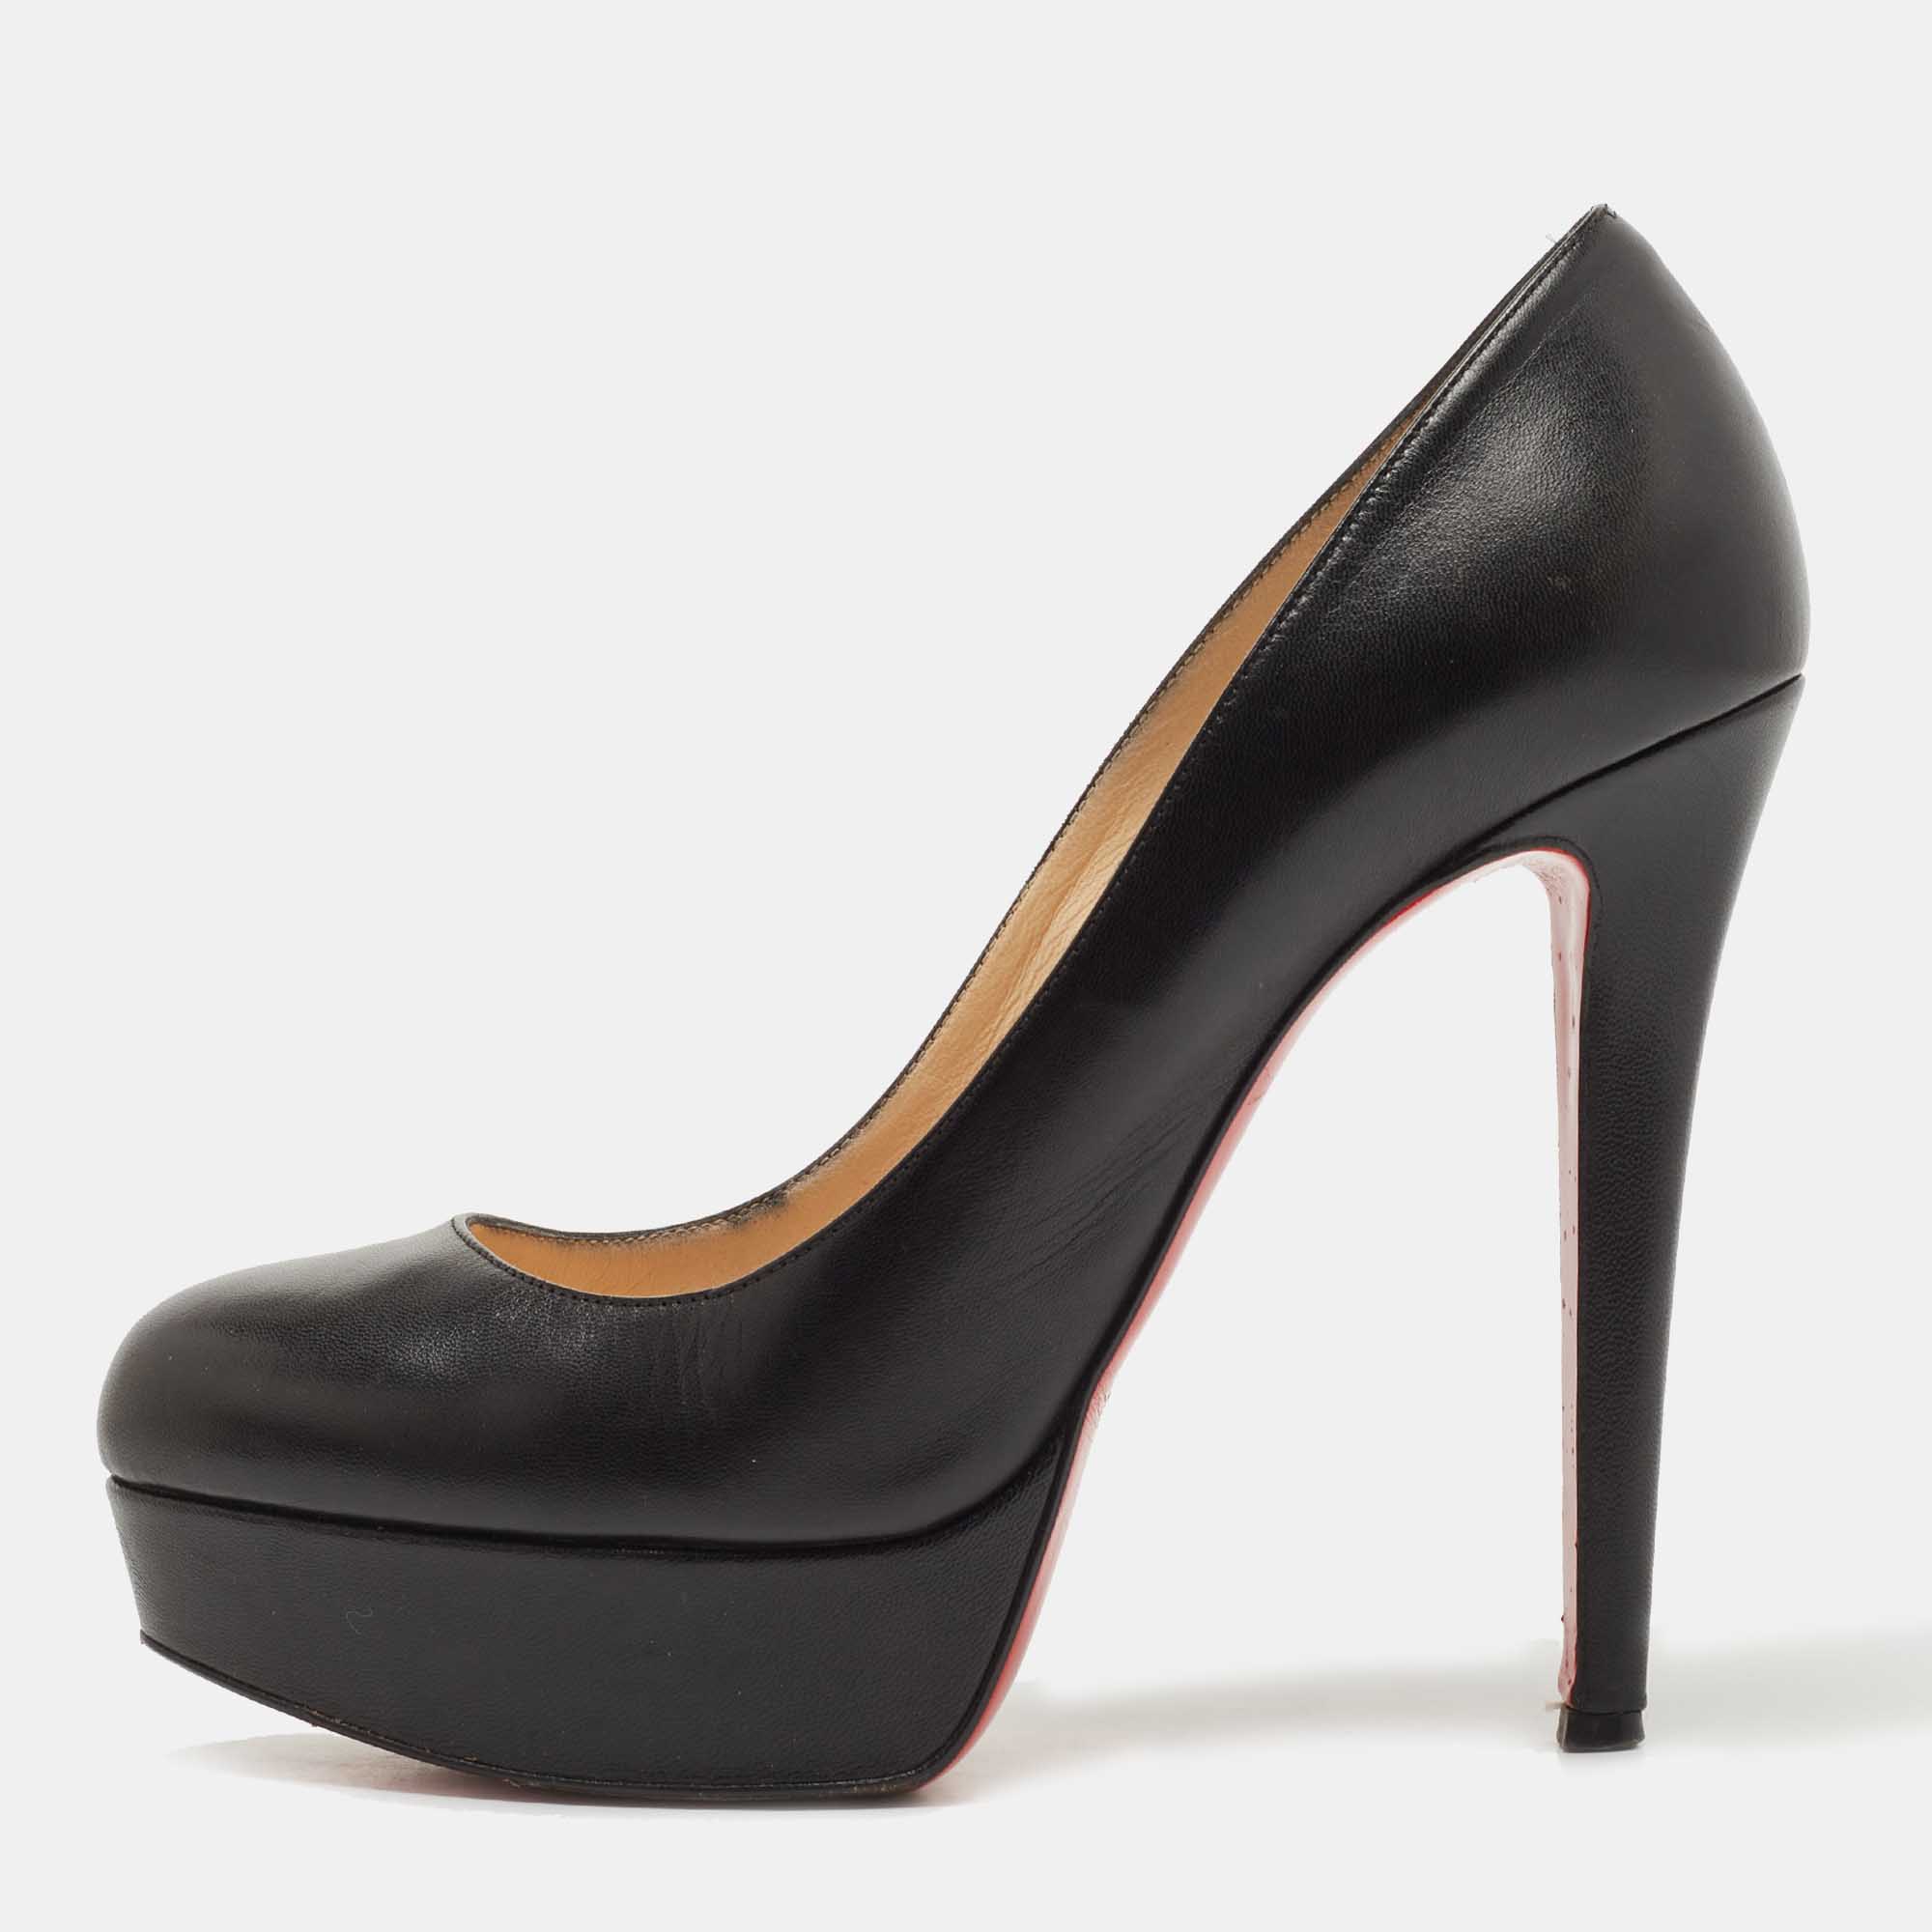 Pre-owned Christian Louboutin Black Leather Bianca Pumps Size 38.5